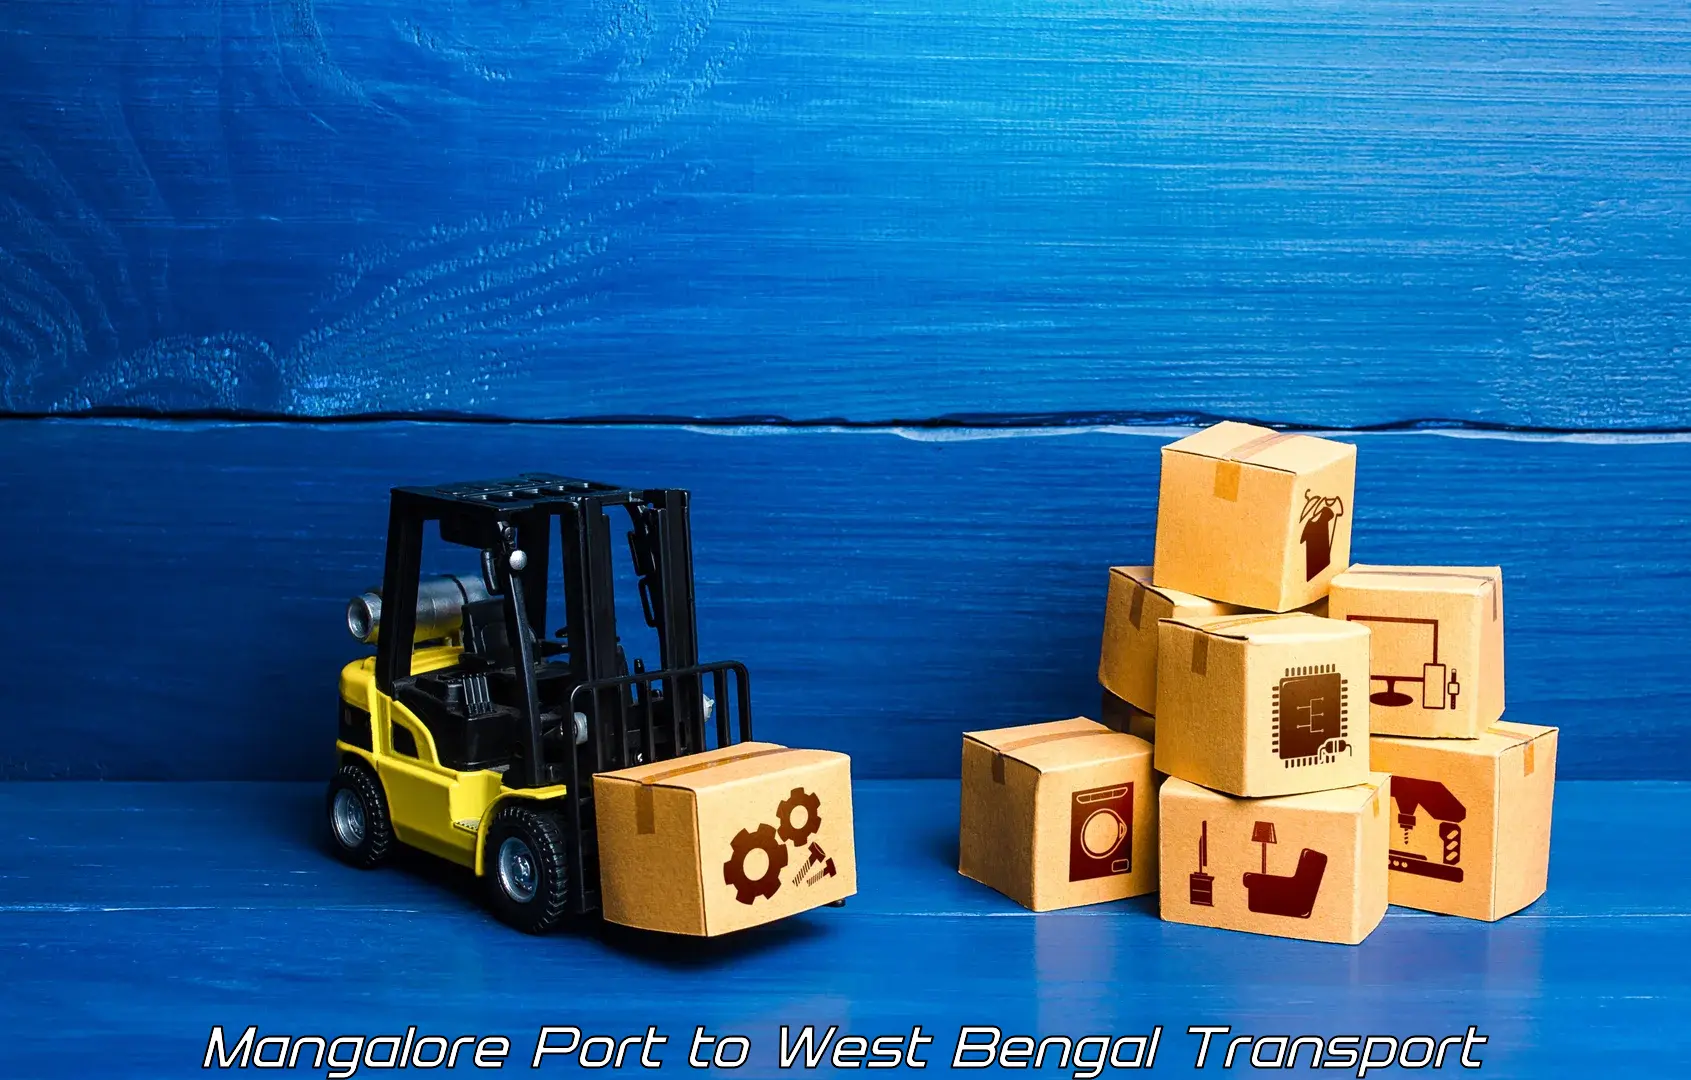 Commercial transport service Mangalore Port to West Bengal